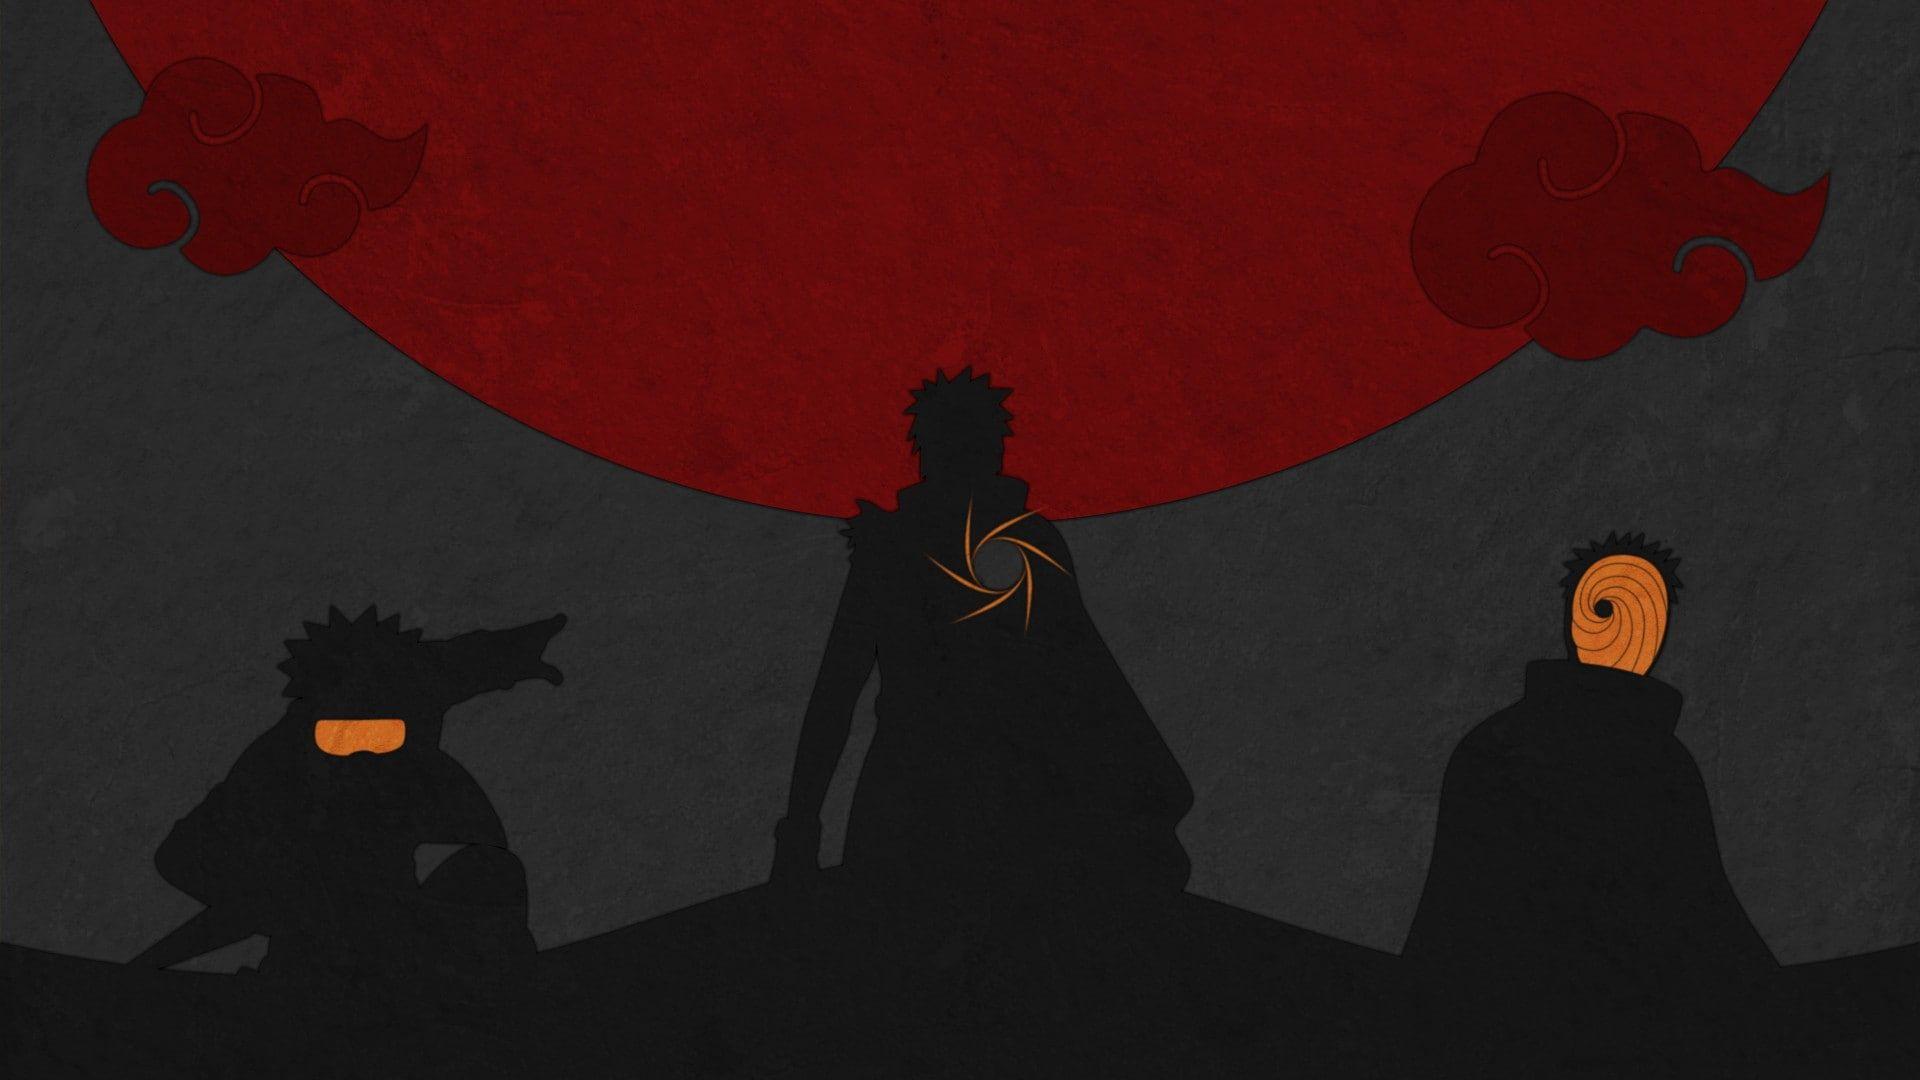 Naruto Silhouette Wallpapers Top Free Naruto Silhouette Backgrounds Wallpaperaccess